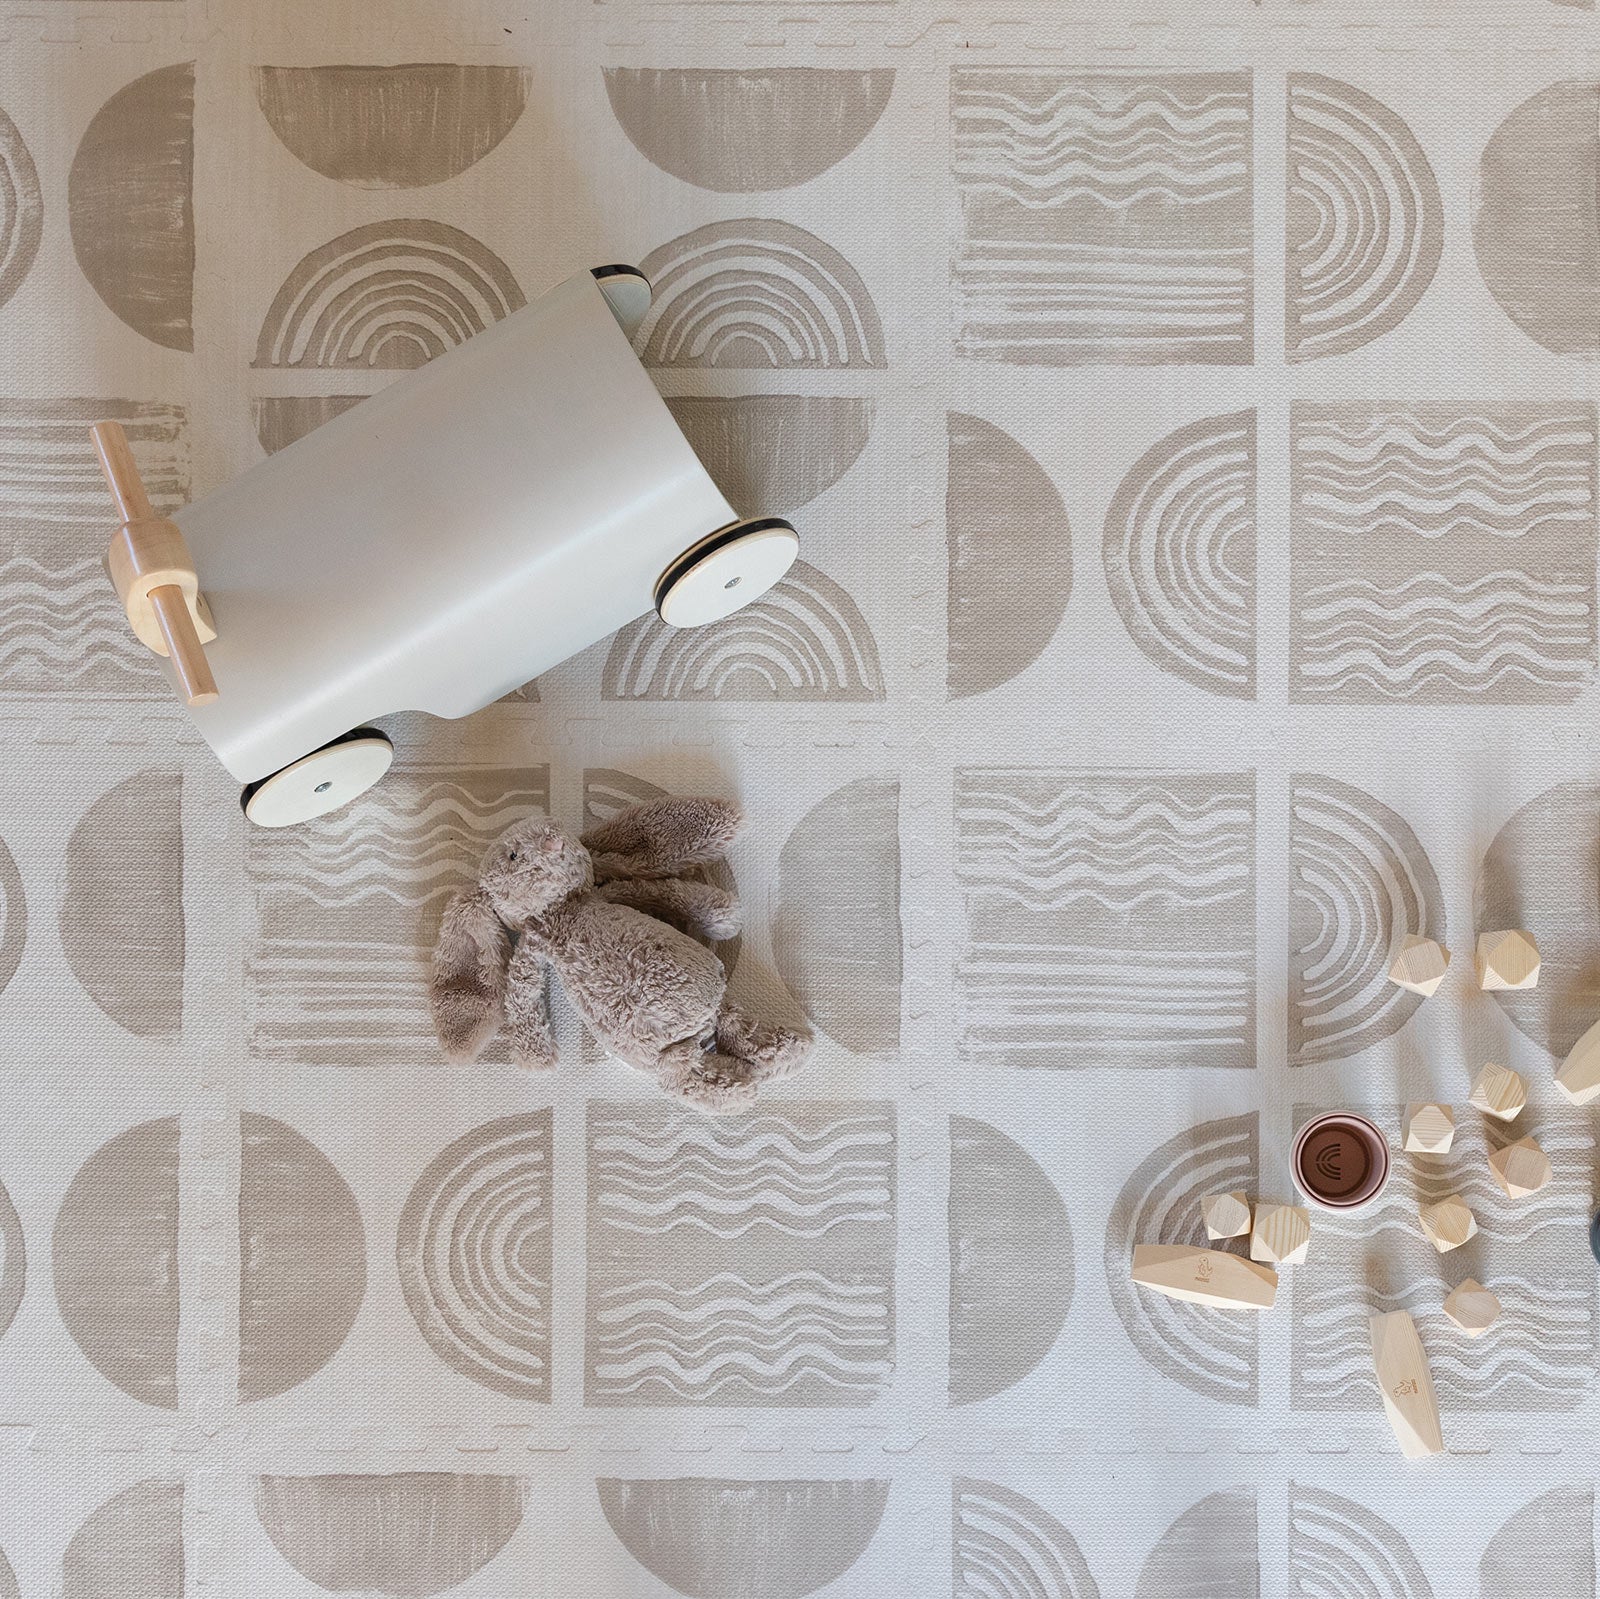 Ada modern minimalist baby play mat in Pebble taupe and off white. Shown from above with baby toys.